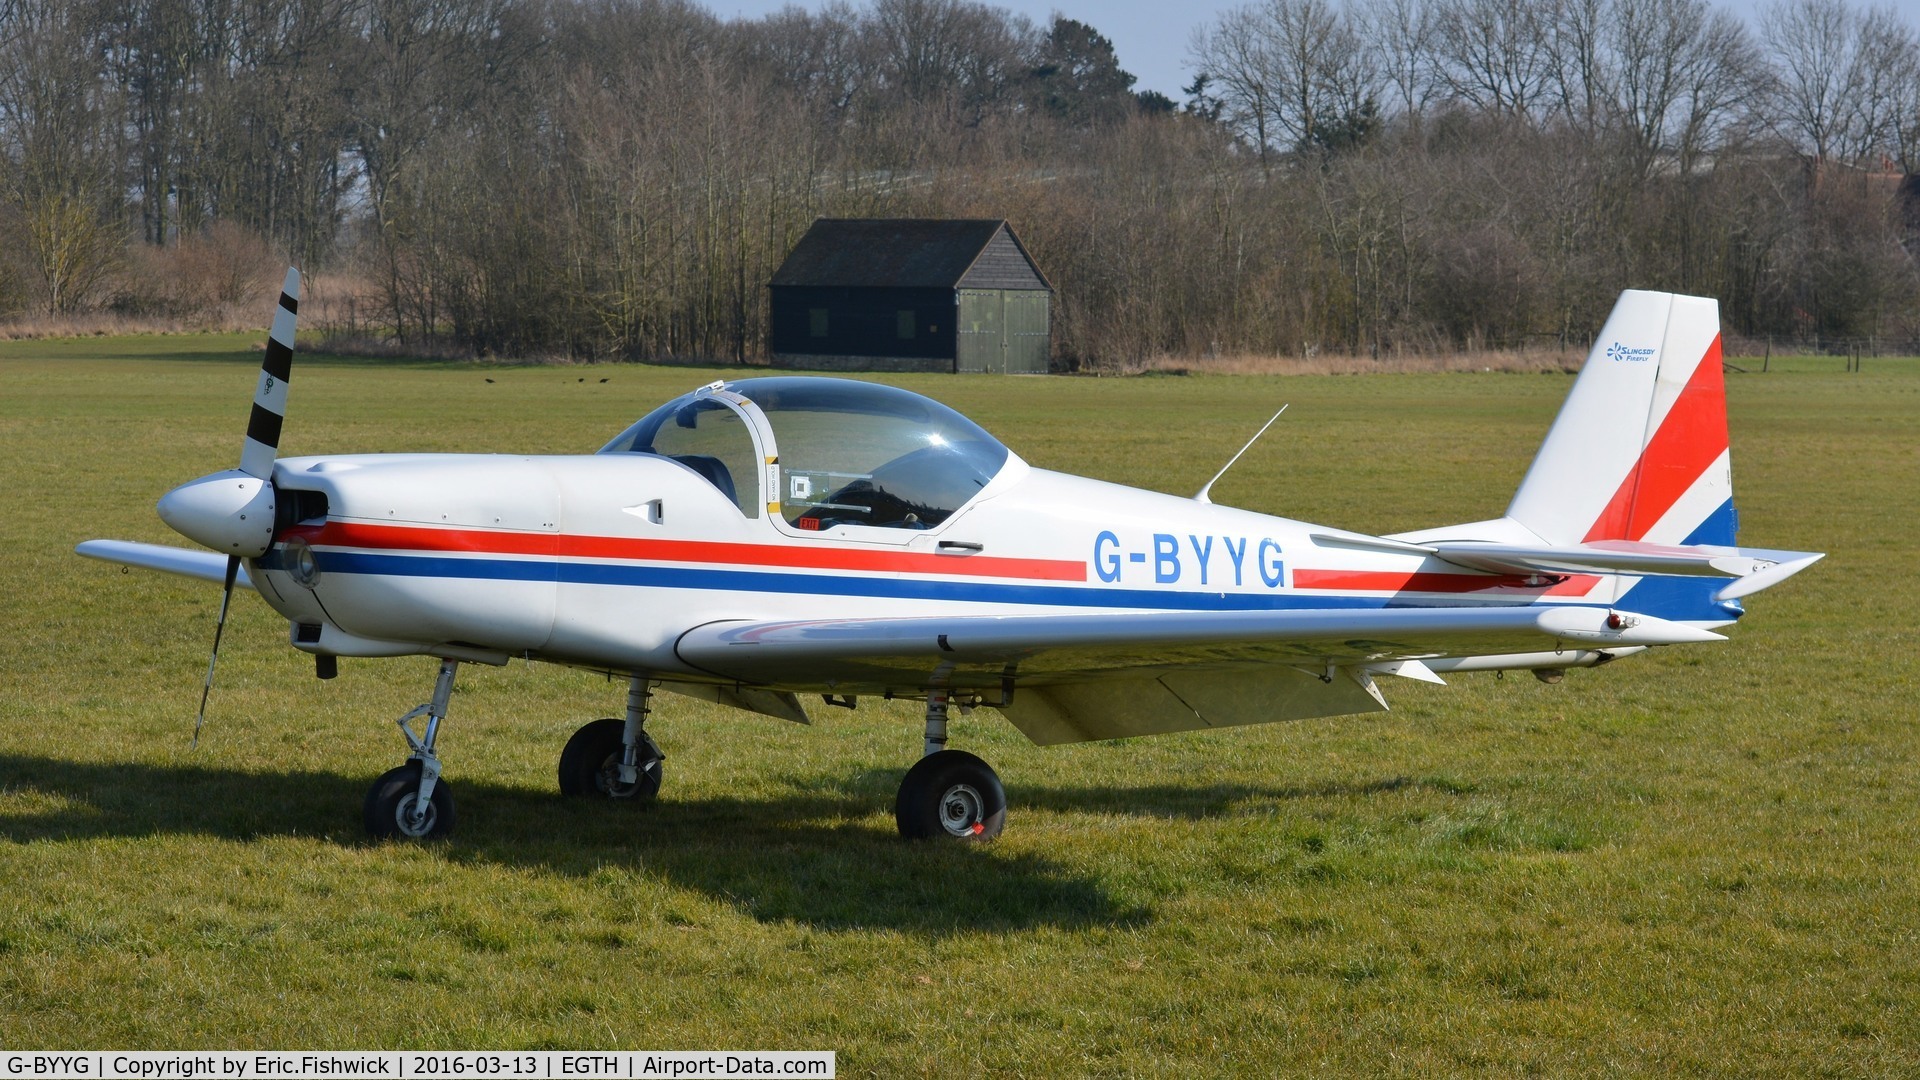 G-BYYG, 1990 Slingsby T-67C Firefly C/N 2101, 3. G-BYYG at The Shuttleworth Collection, March 2016.